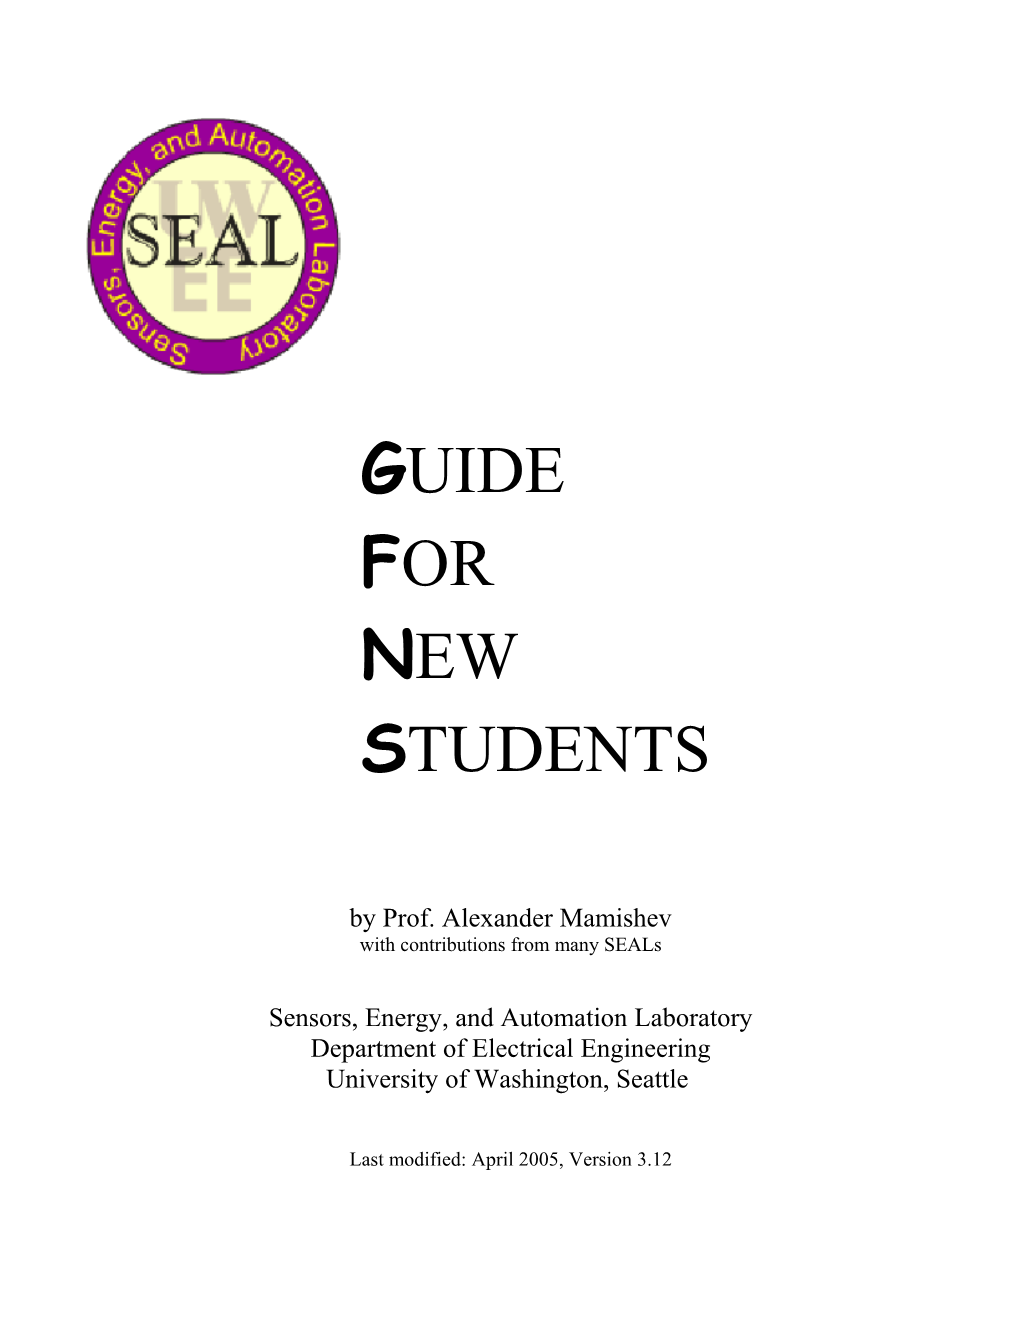 A Guide for New Students